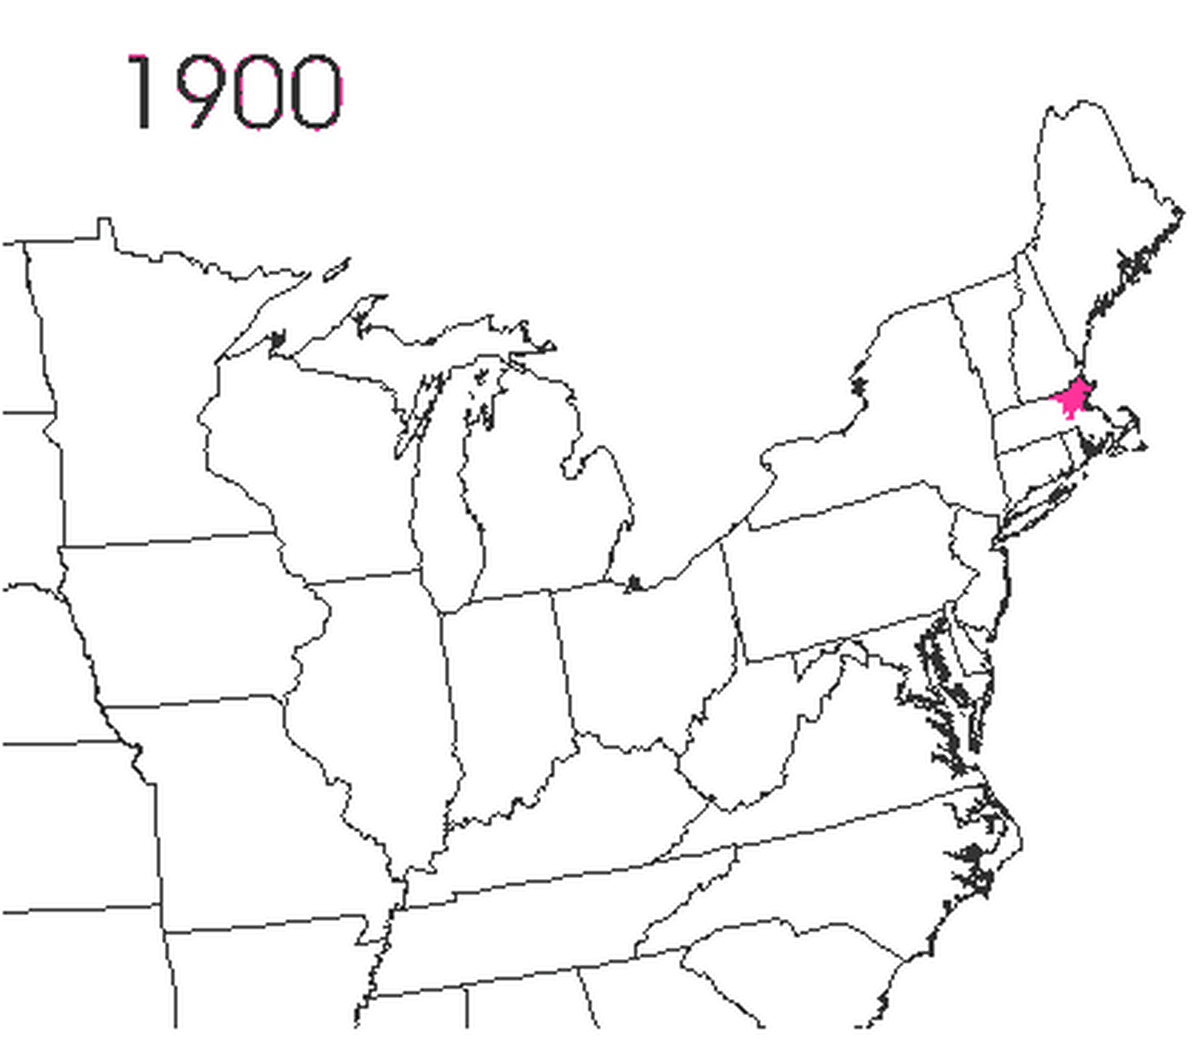 Time lapse showing the spread of the L. dispar caterpillar in the United States